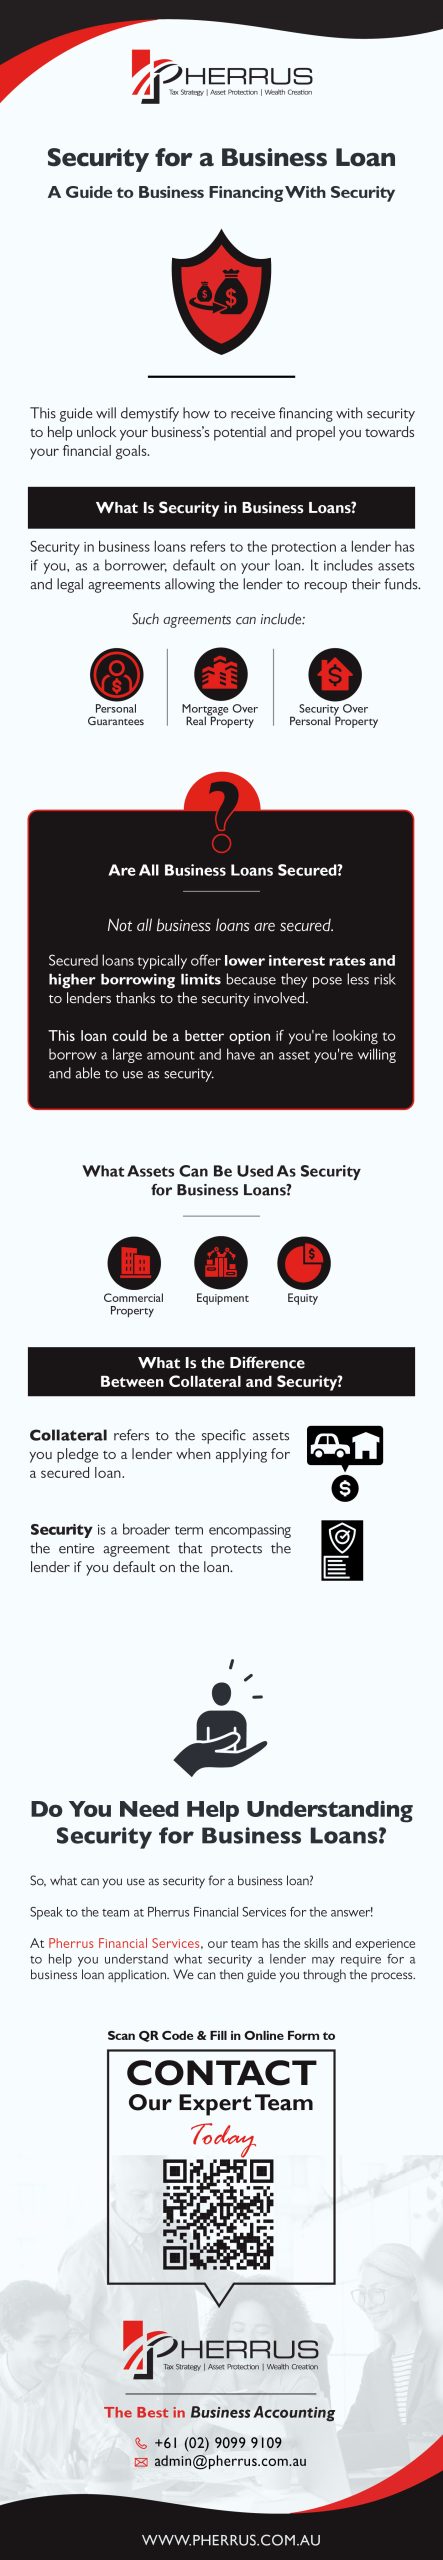 Security for a Business Loan - A Guide to Business Financing With Security Infographic